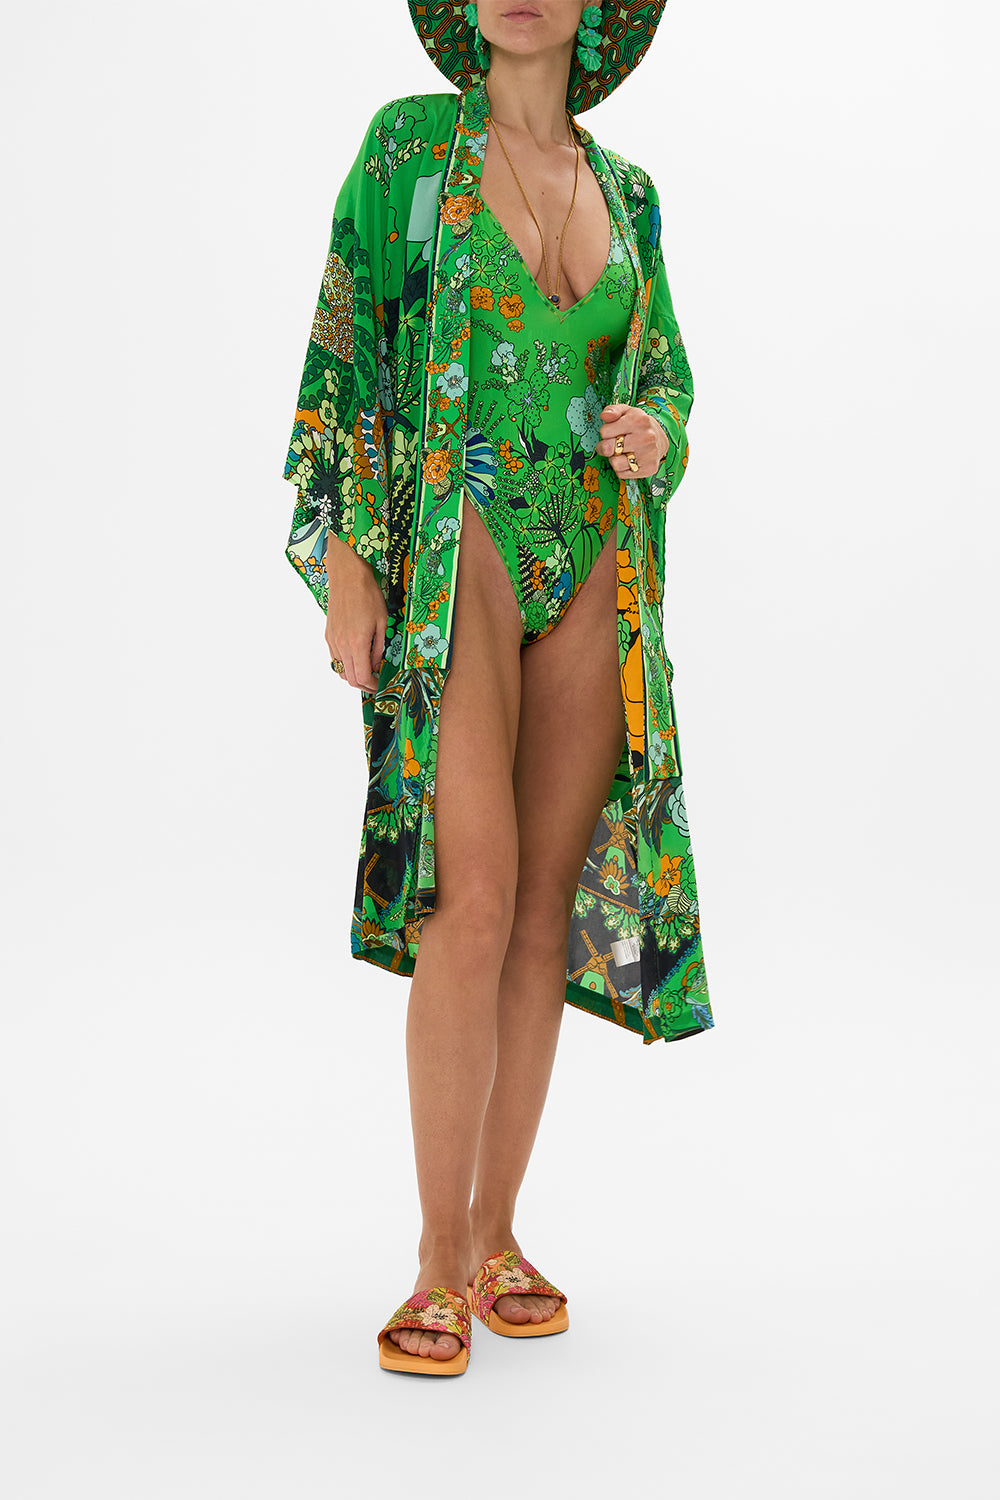 CAMILLA green v-neck one piece with multicolor stitching in Good Vibes Generation